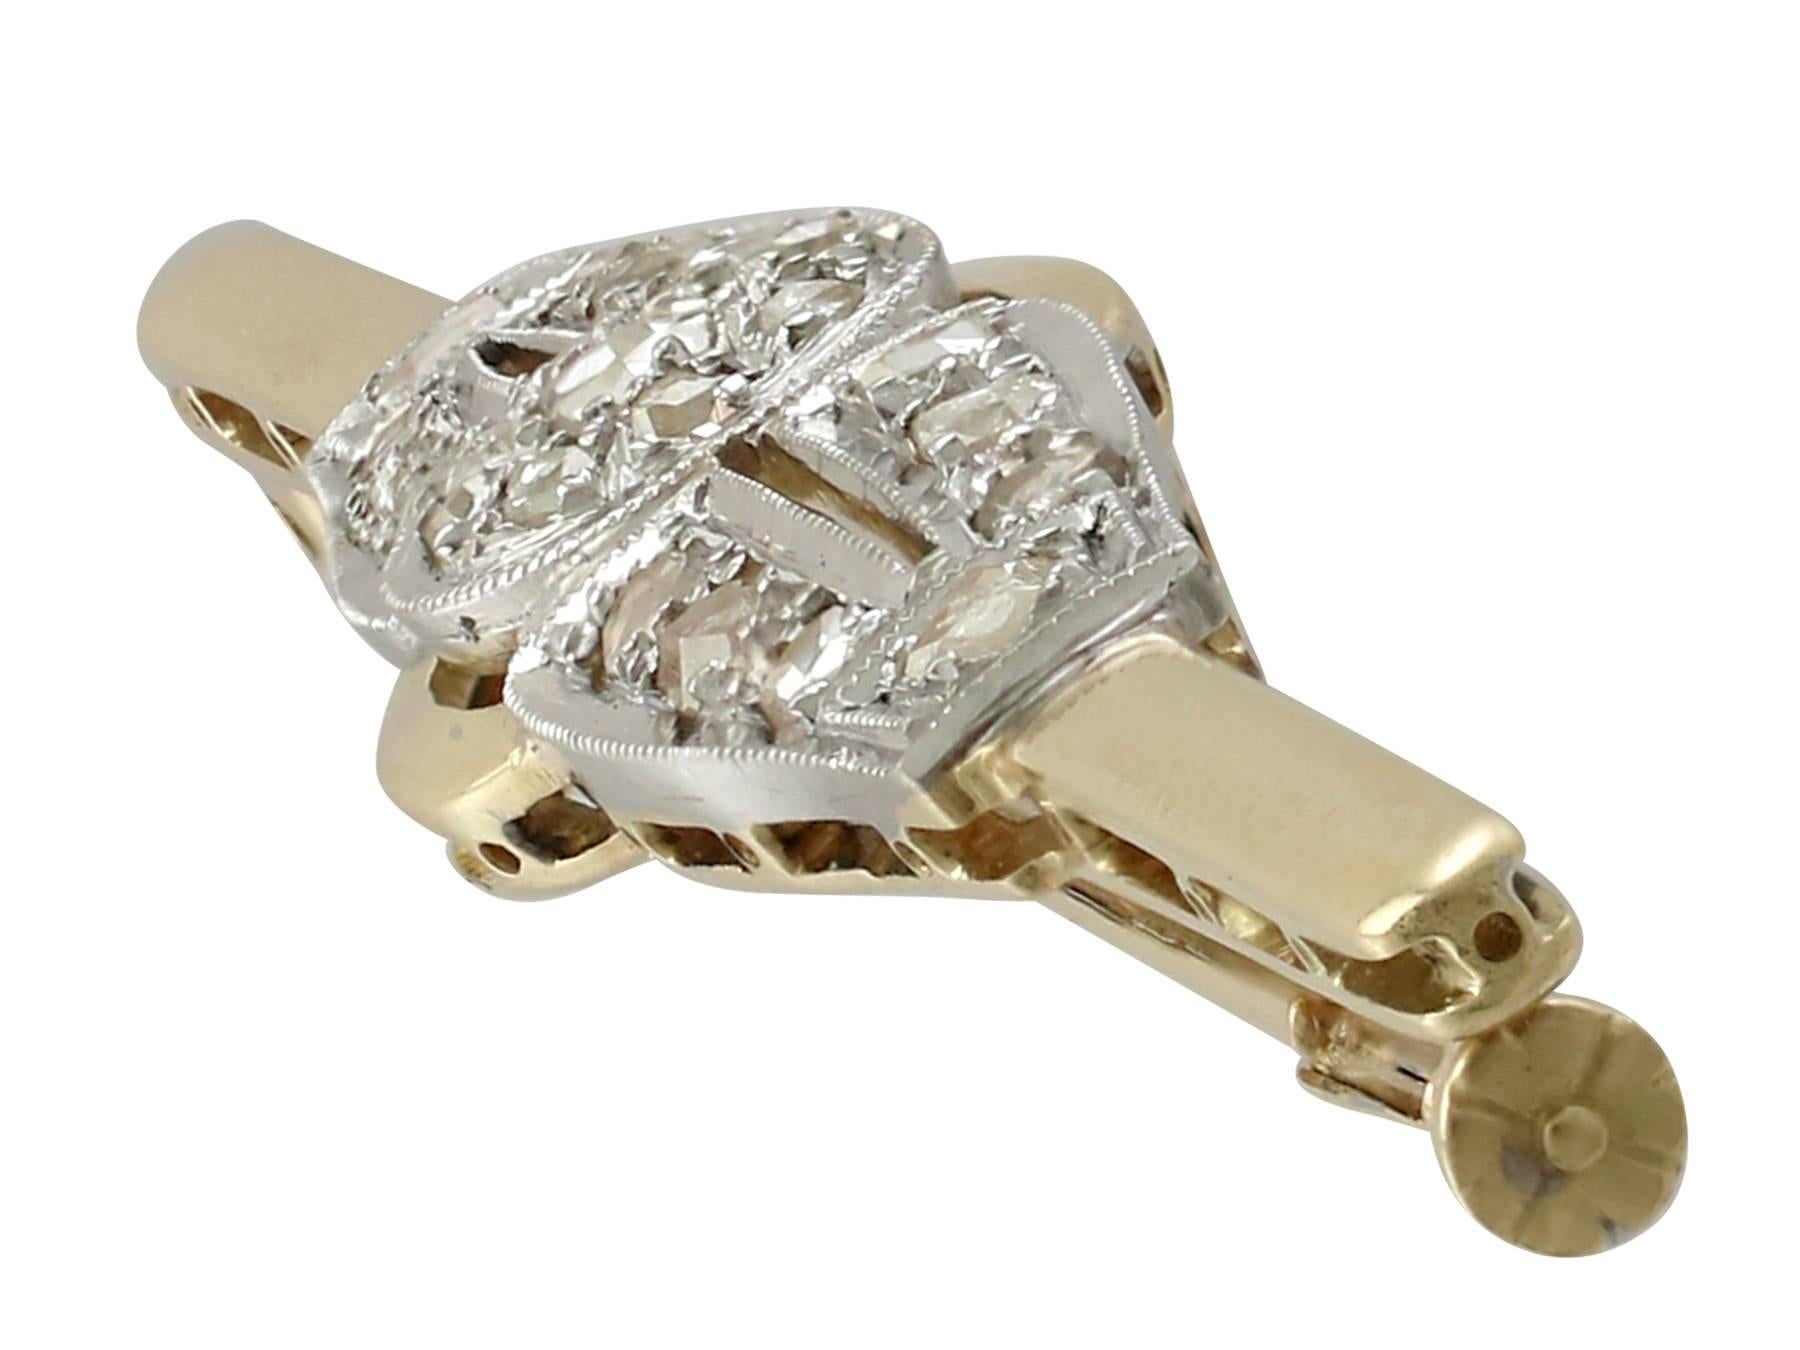 A fine and impressive antique 0.57 carat diamond and 18 karat yellow gold, 18 karat white gold set bar brooch; part of our diverse antique jewelry collections.

This fine and impressive diamond brooch has been crafted in 18k yellow gold with an 18k